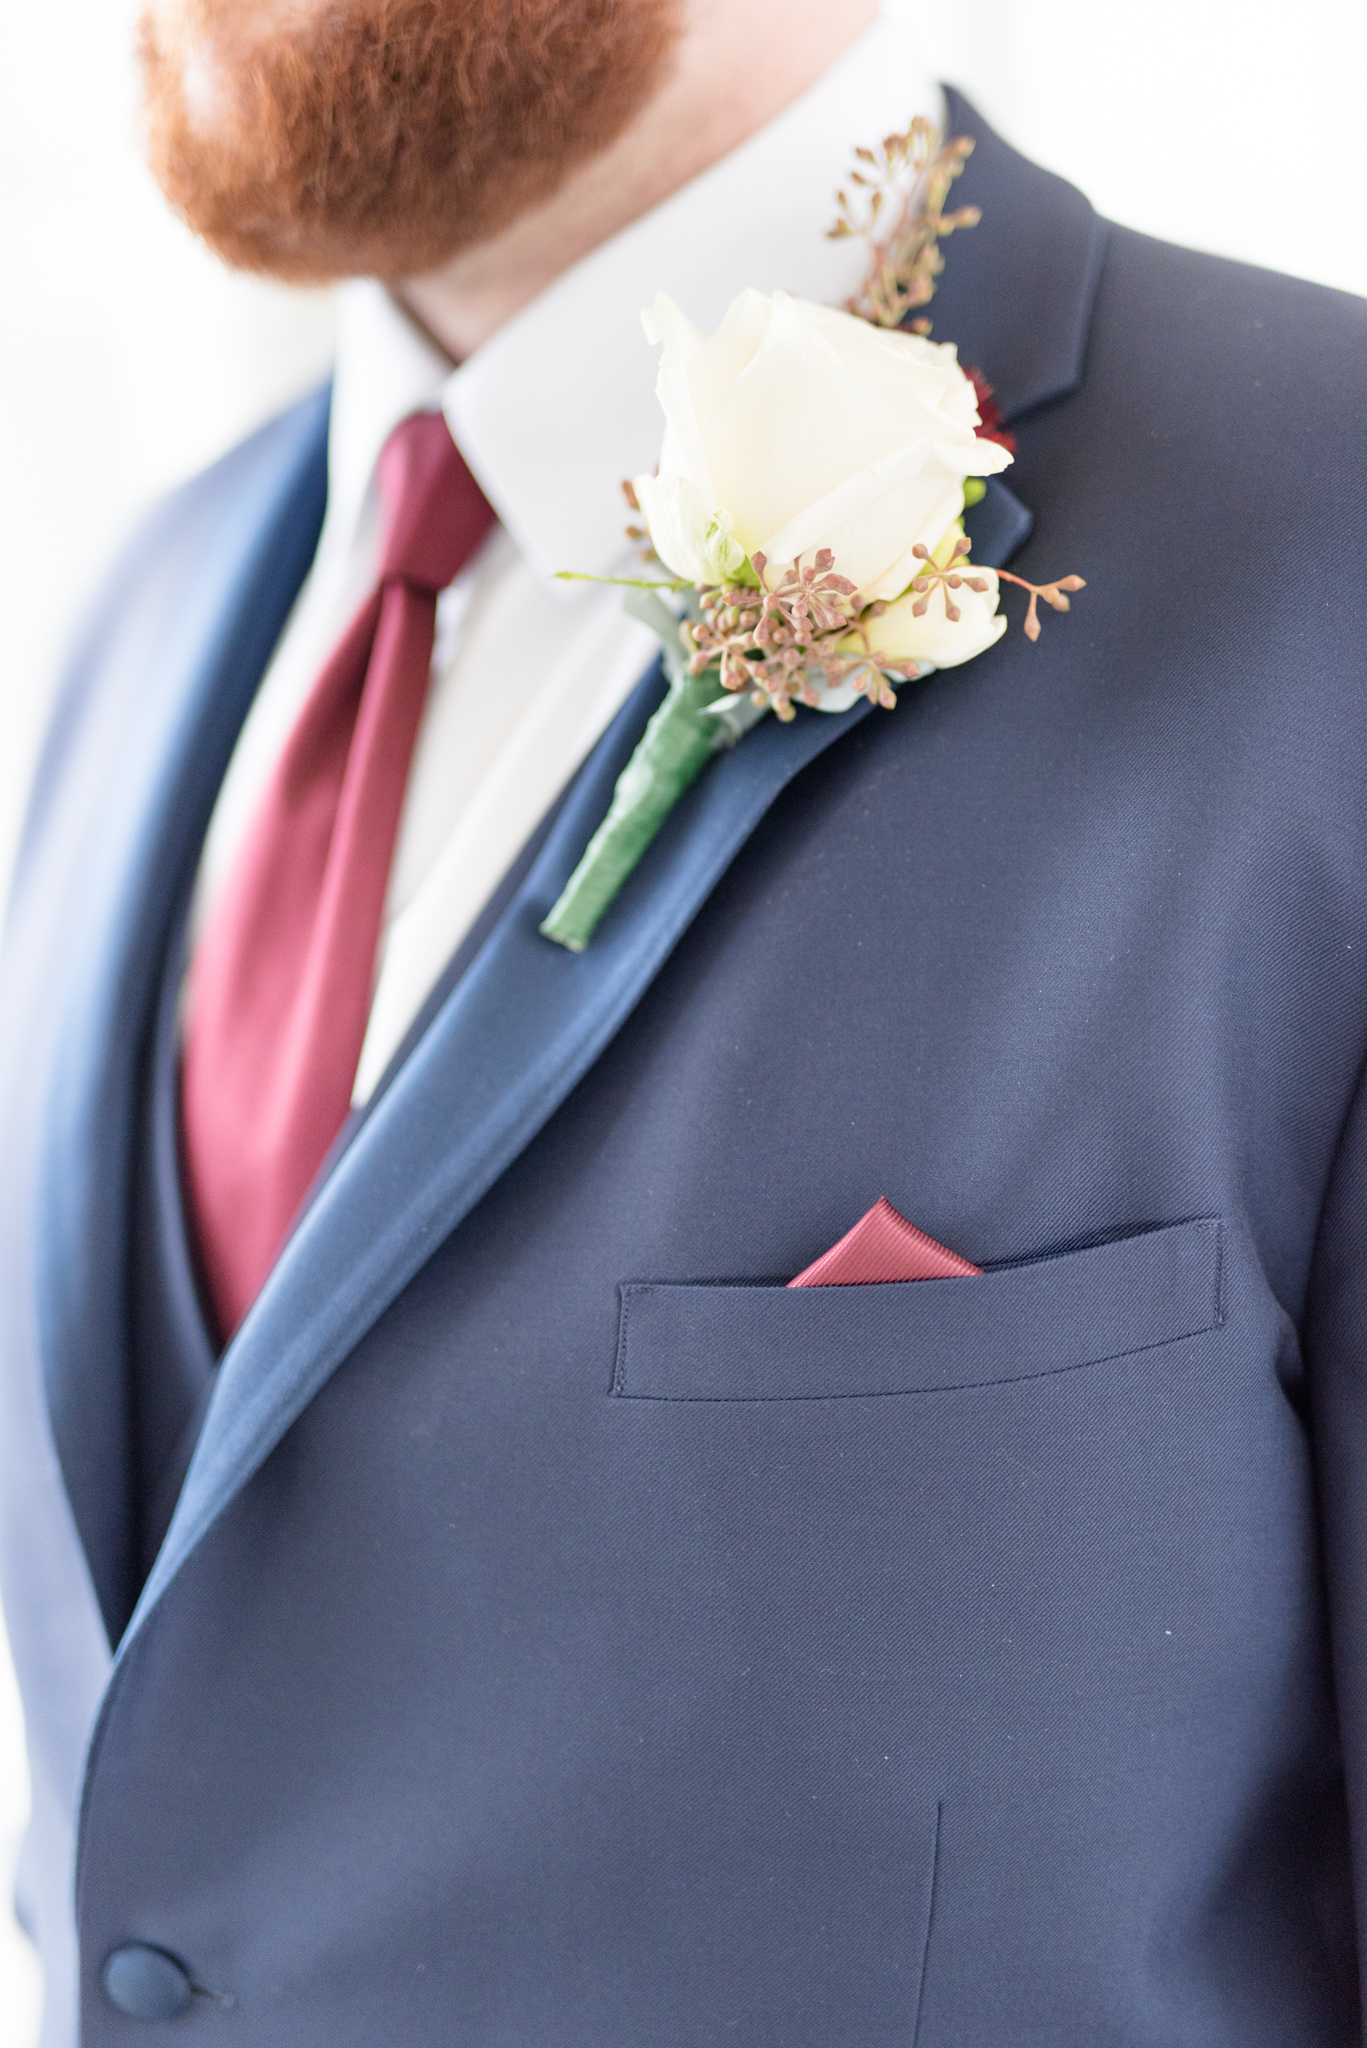 Groom's boutonniere.